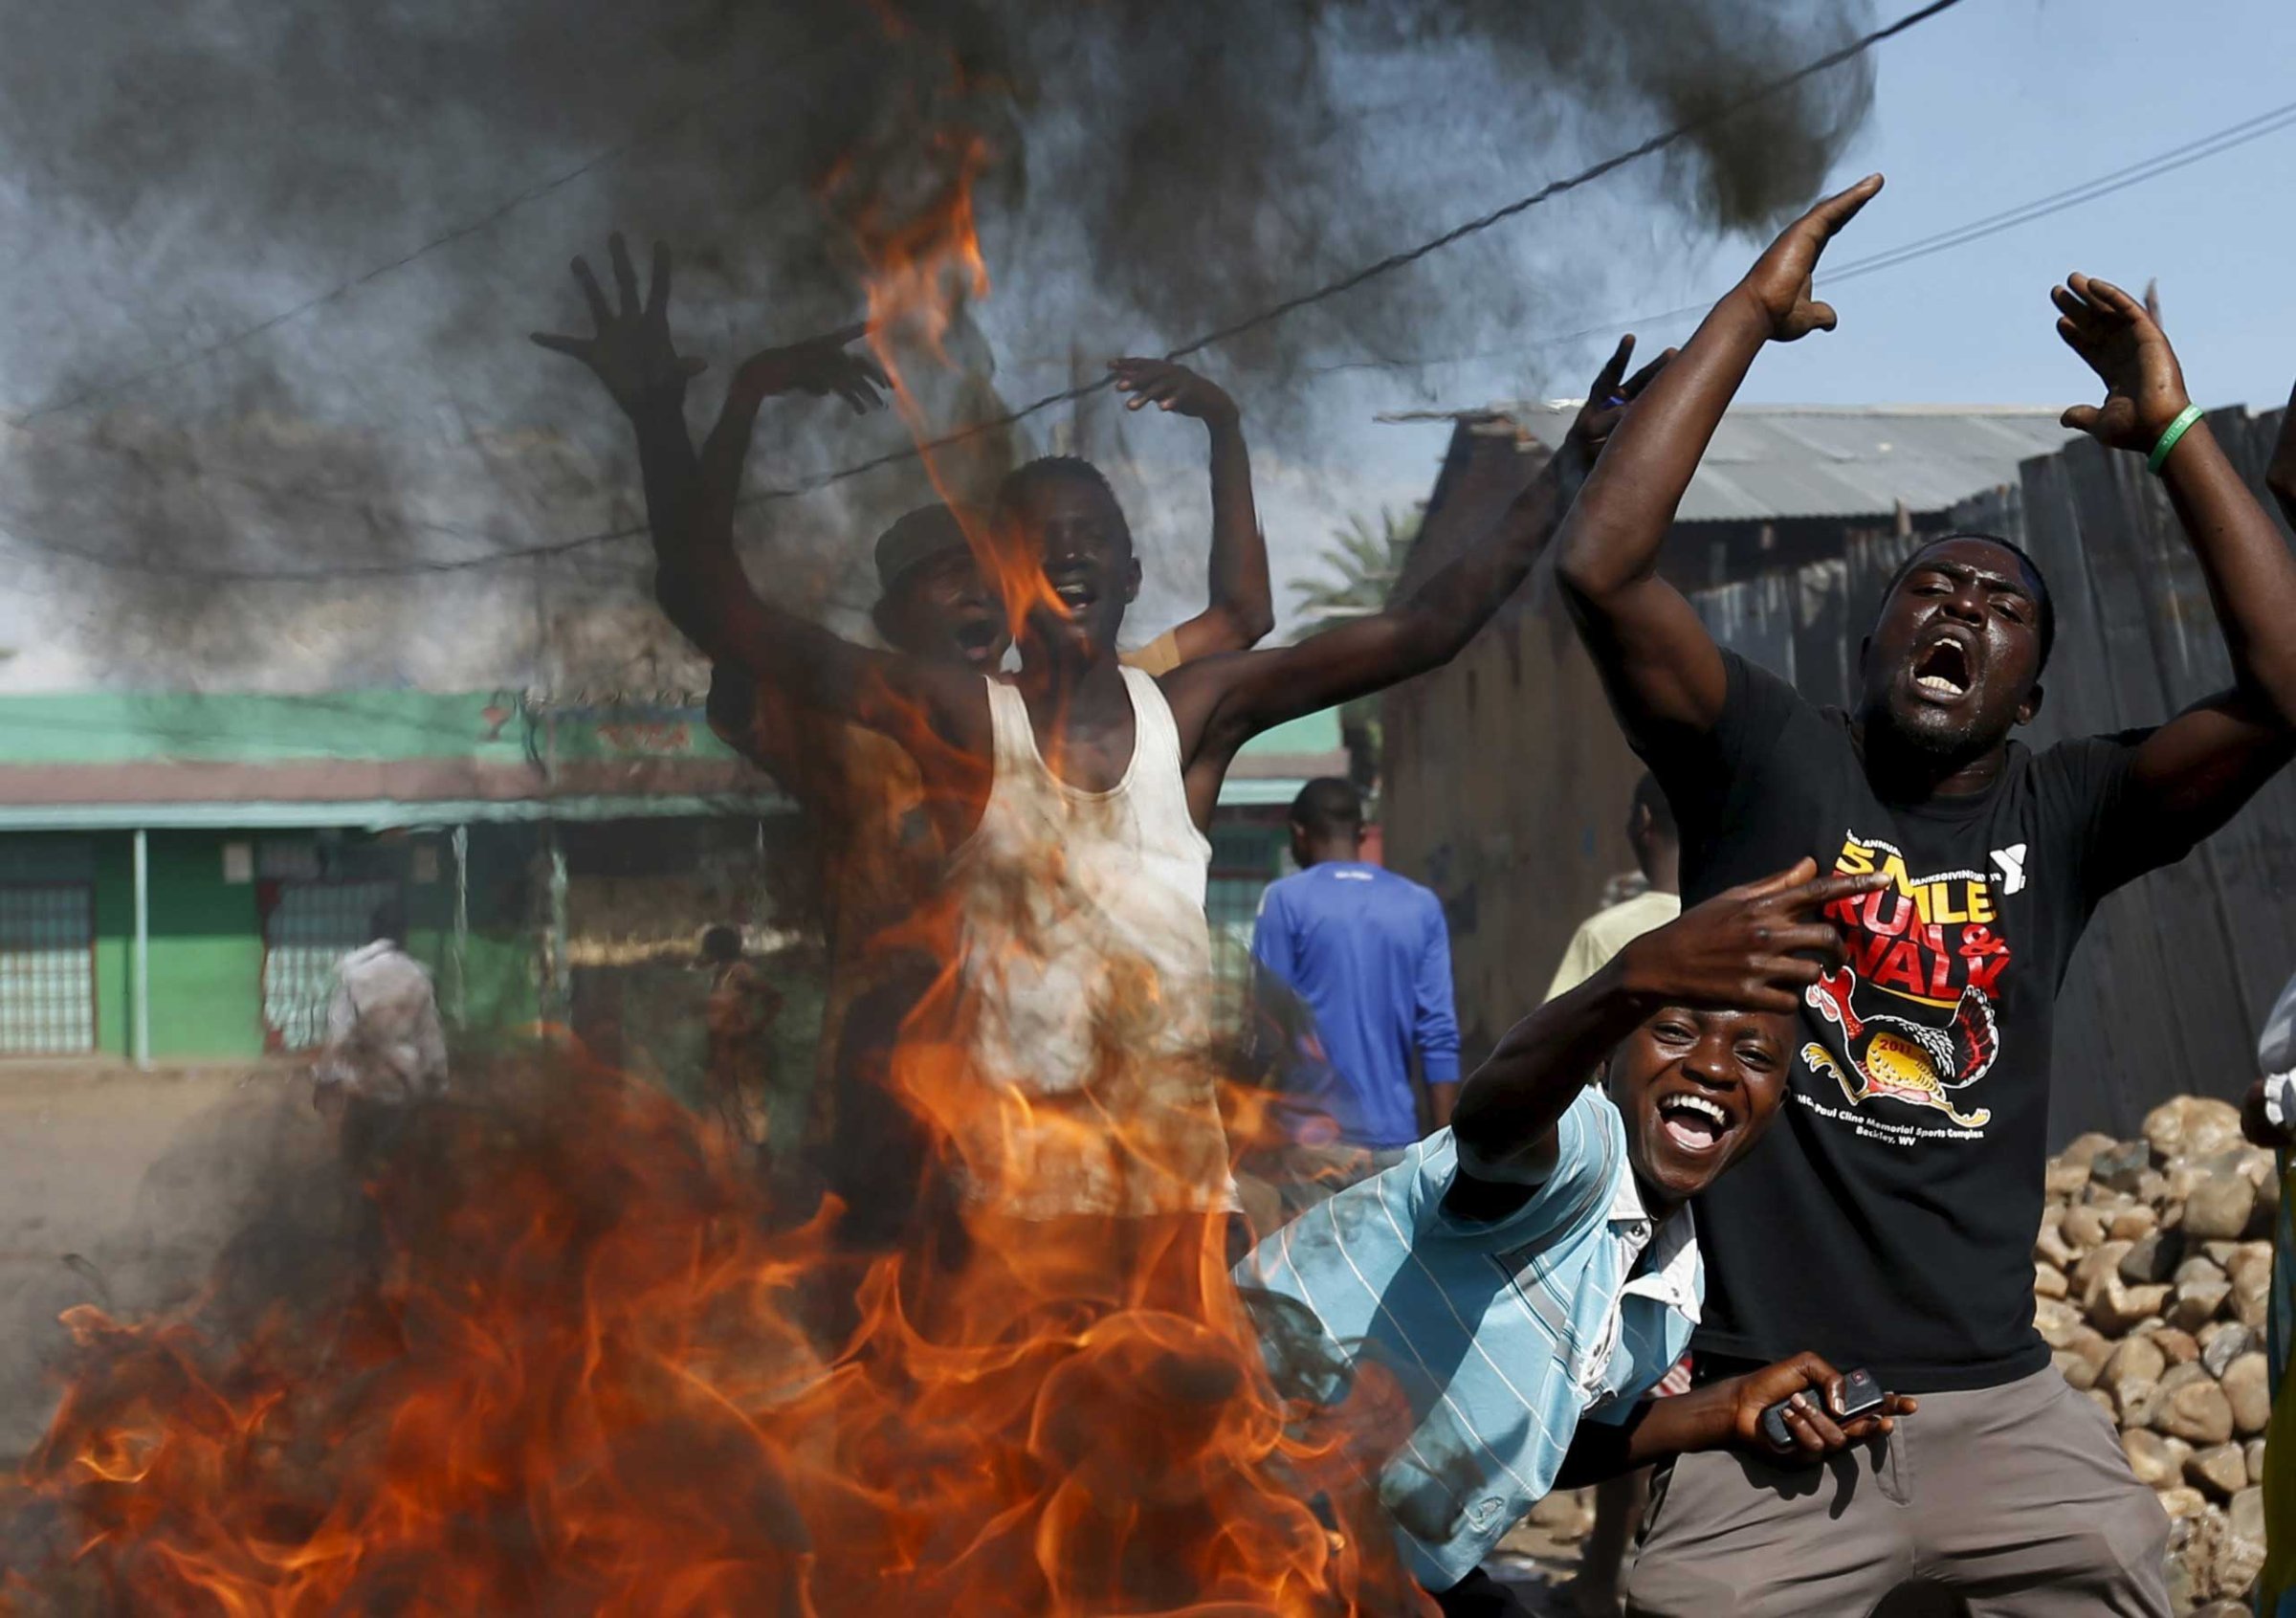 Protesters, who are against President Pierre Nkurunziza's decision to run for a third term, gesture in front of a burning barricade in Bujumbura, Burundi on May 14, 2015.